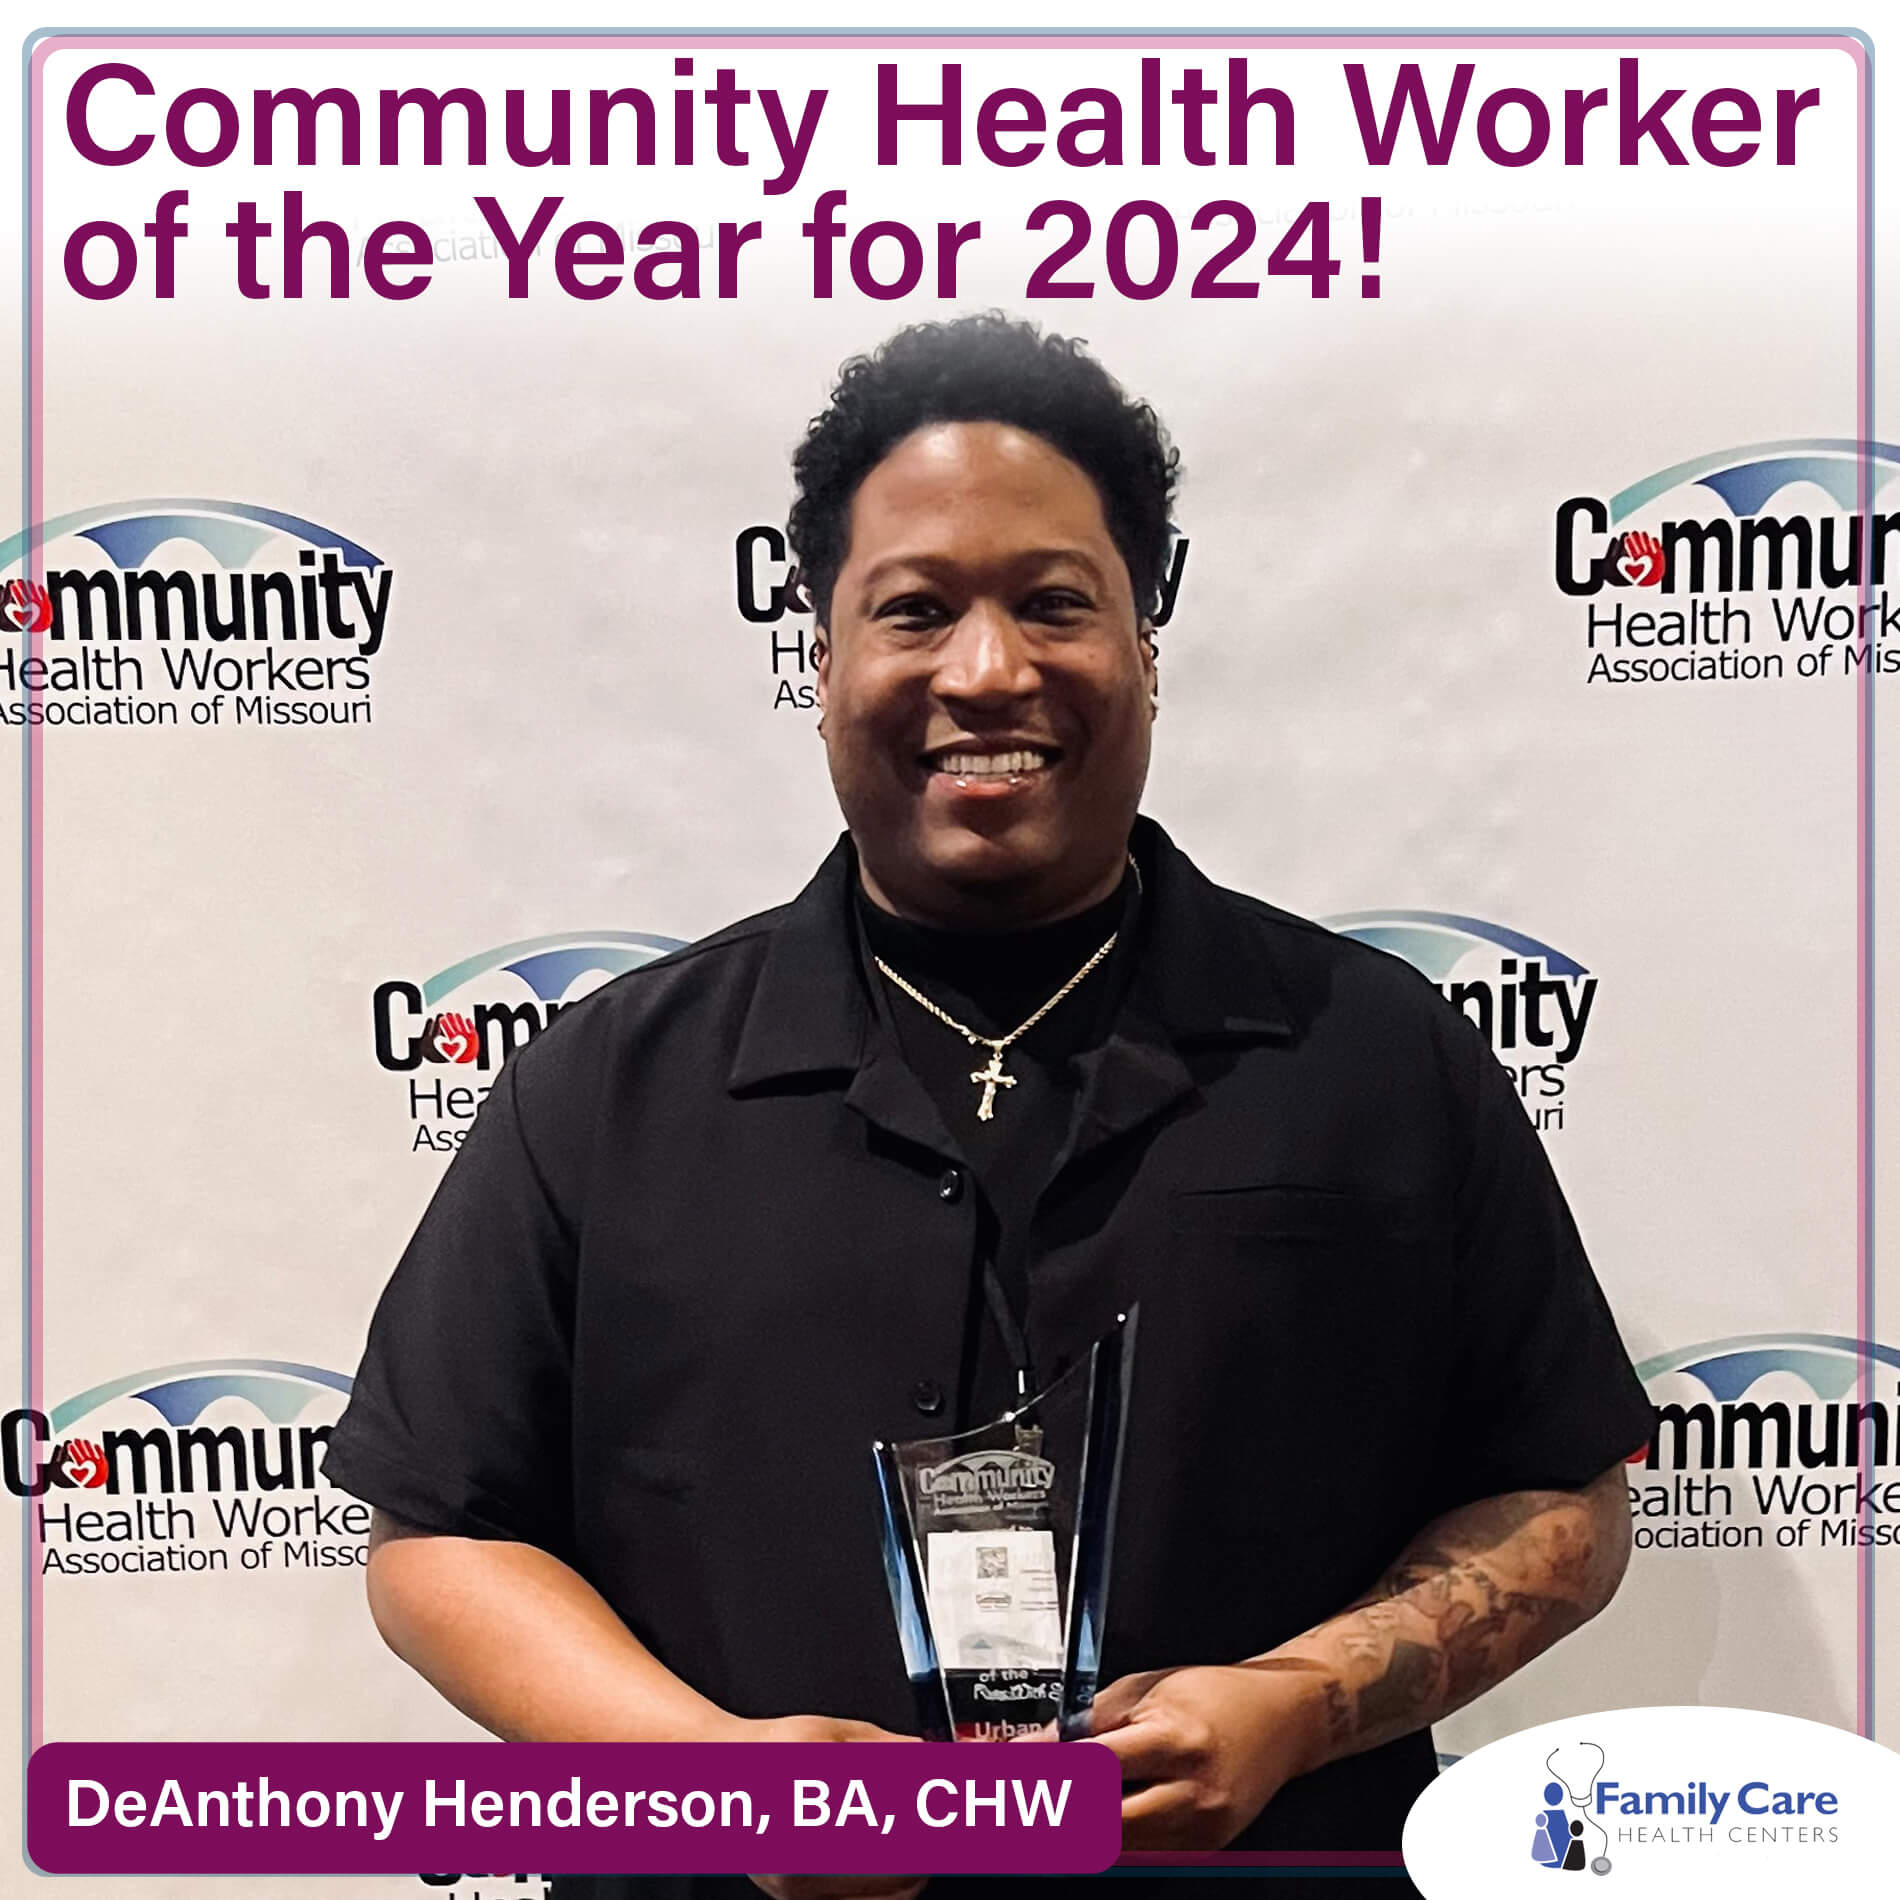 Family Care Health Centers Community Health Worker DeAnthony Henderson